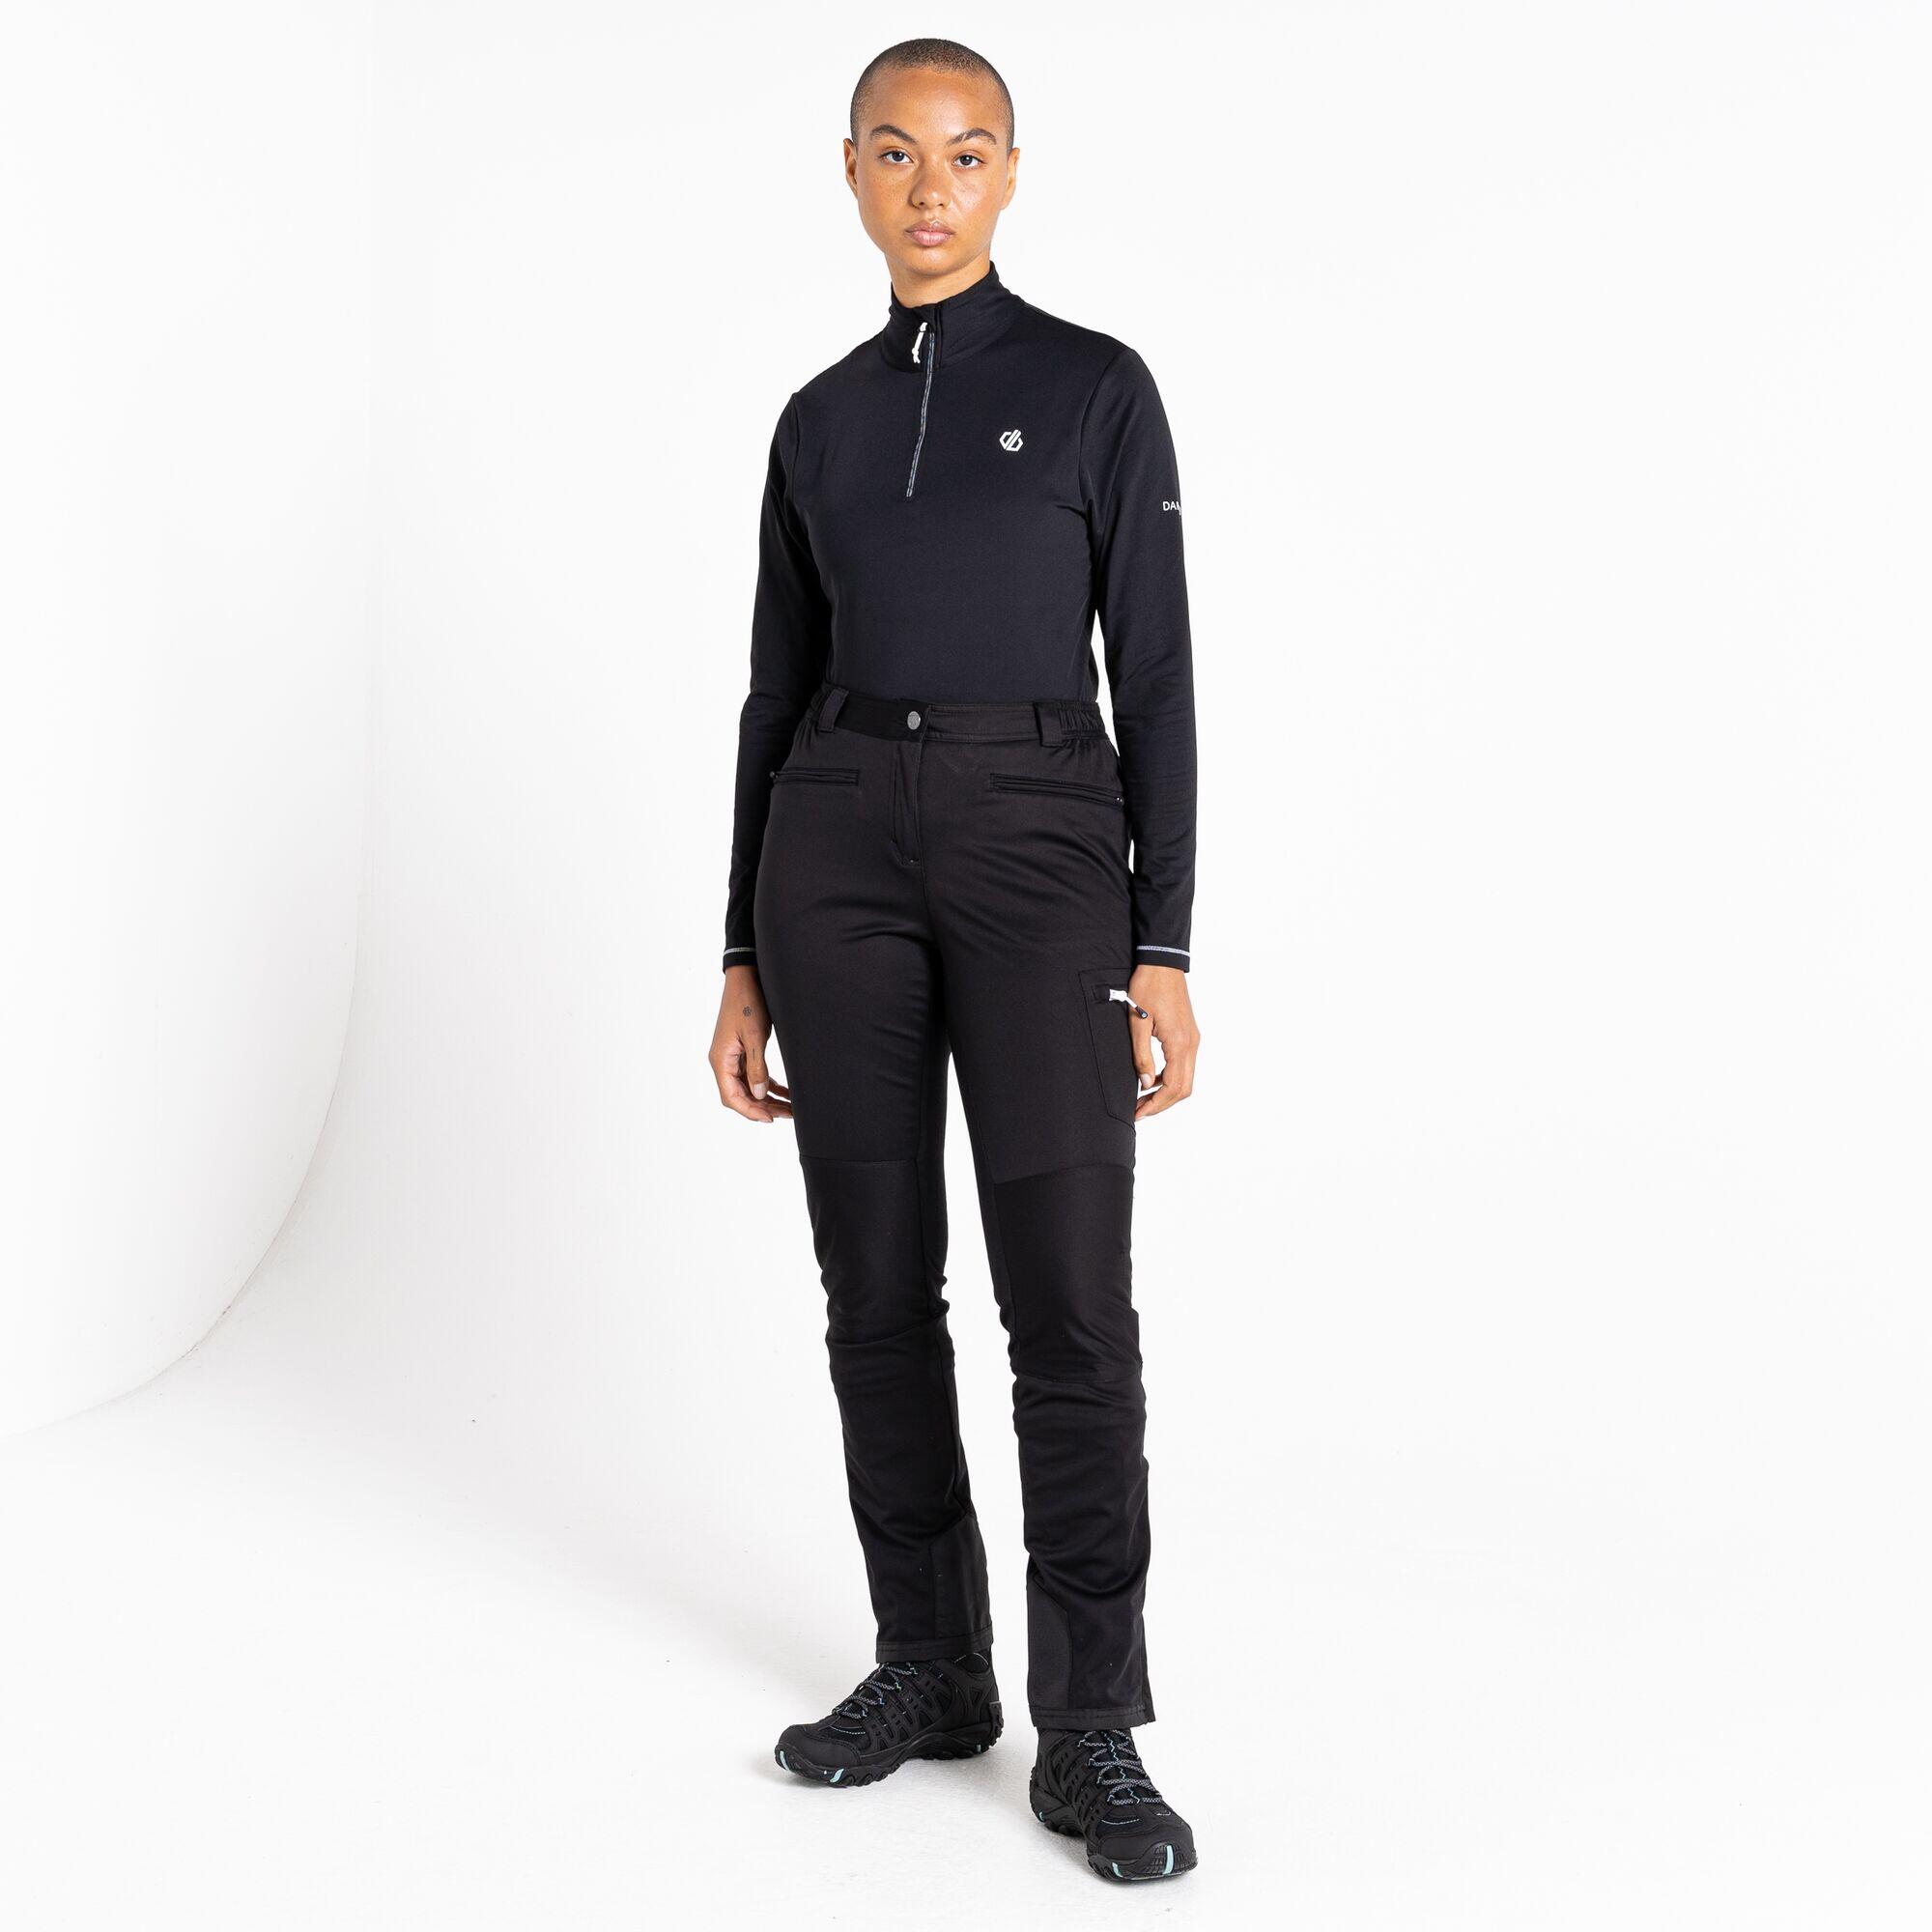 Appended II Women's Hiking Trousers - Black 4/7